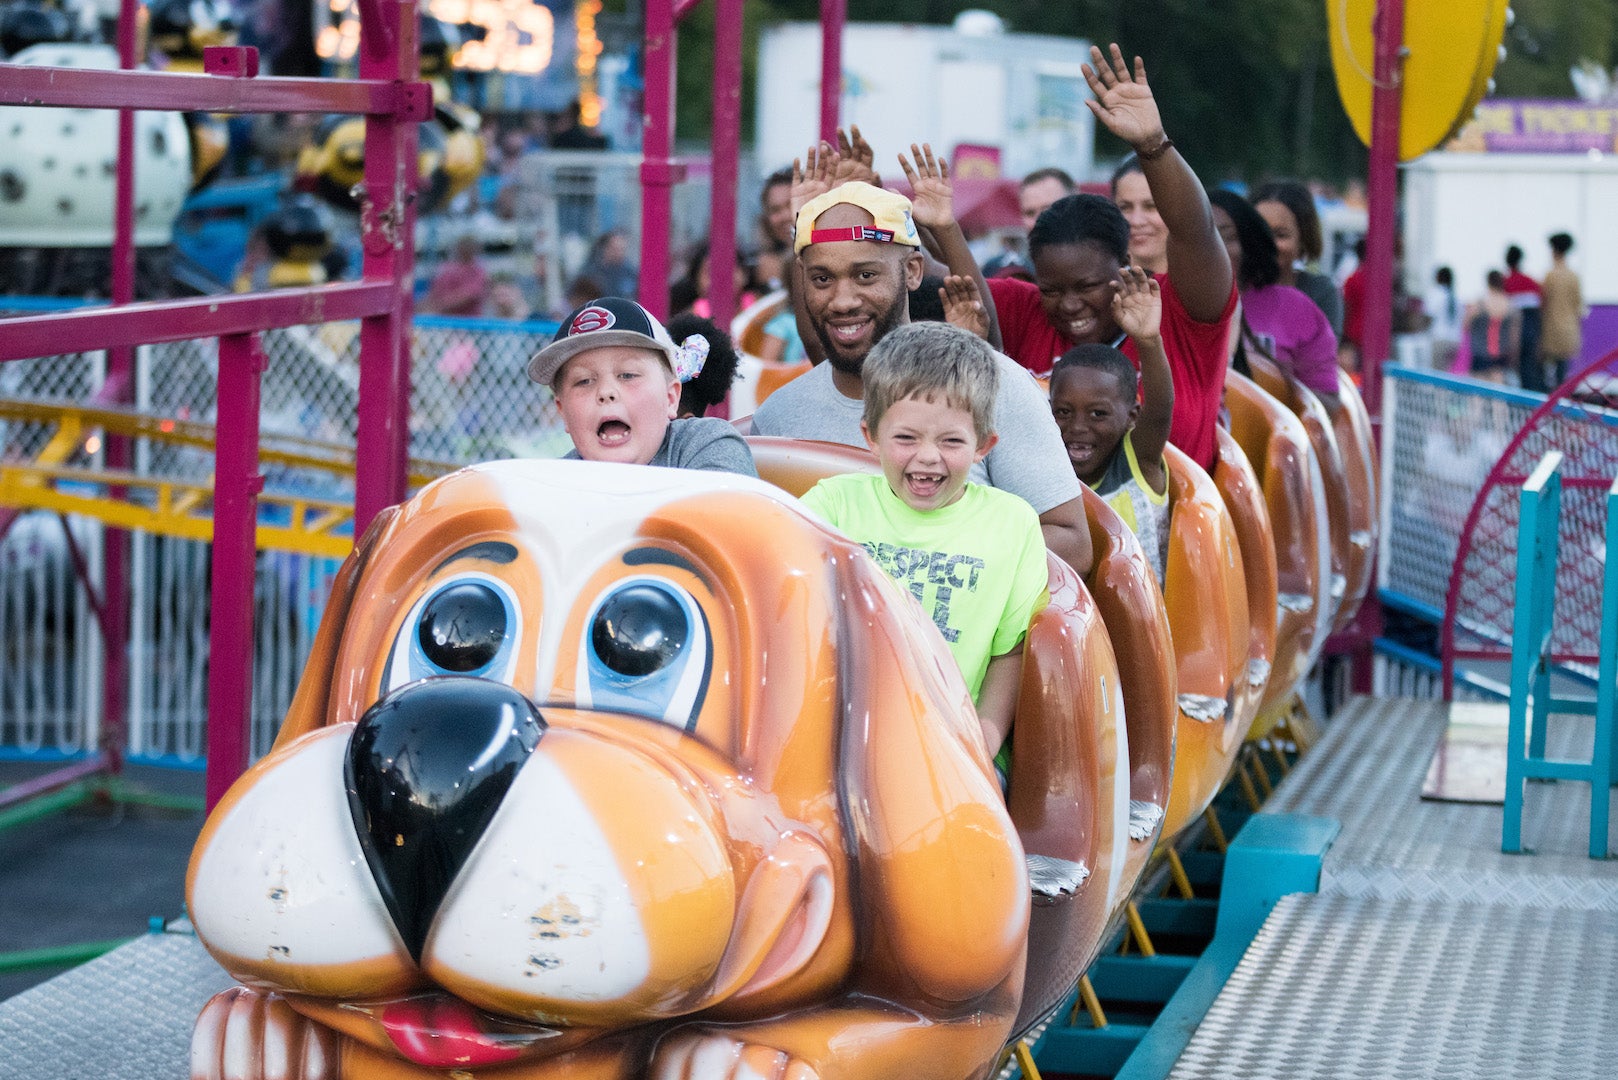 Oak Mountain State Fair’s opening day is April 18 Shelby County